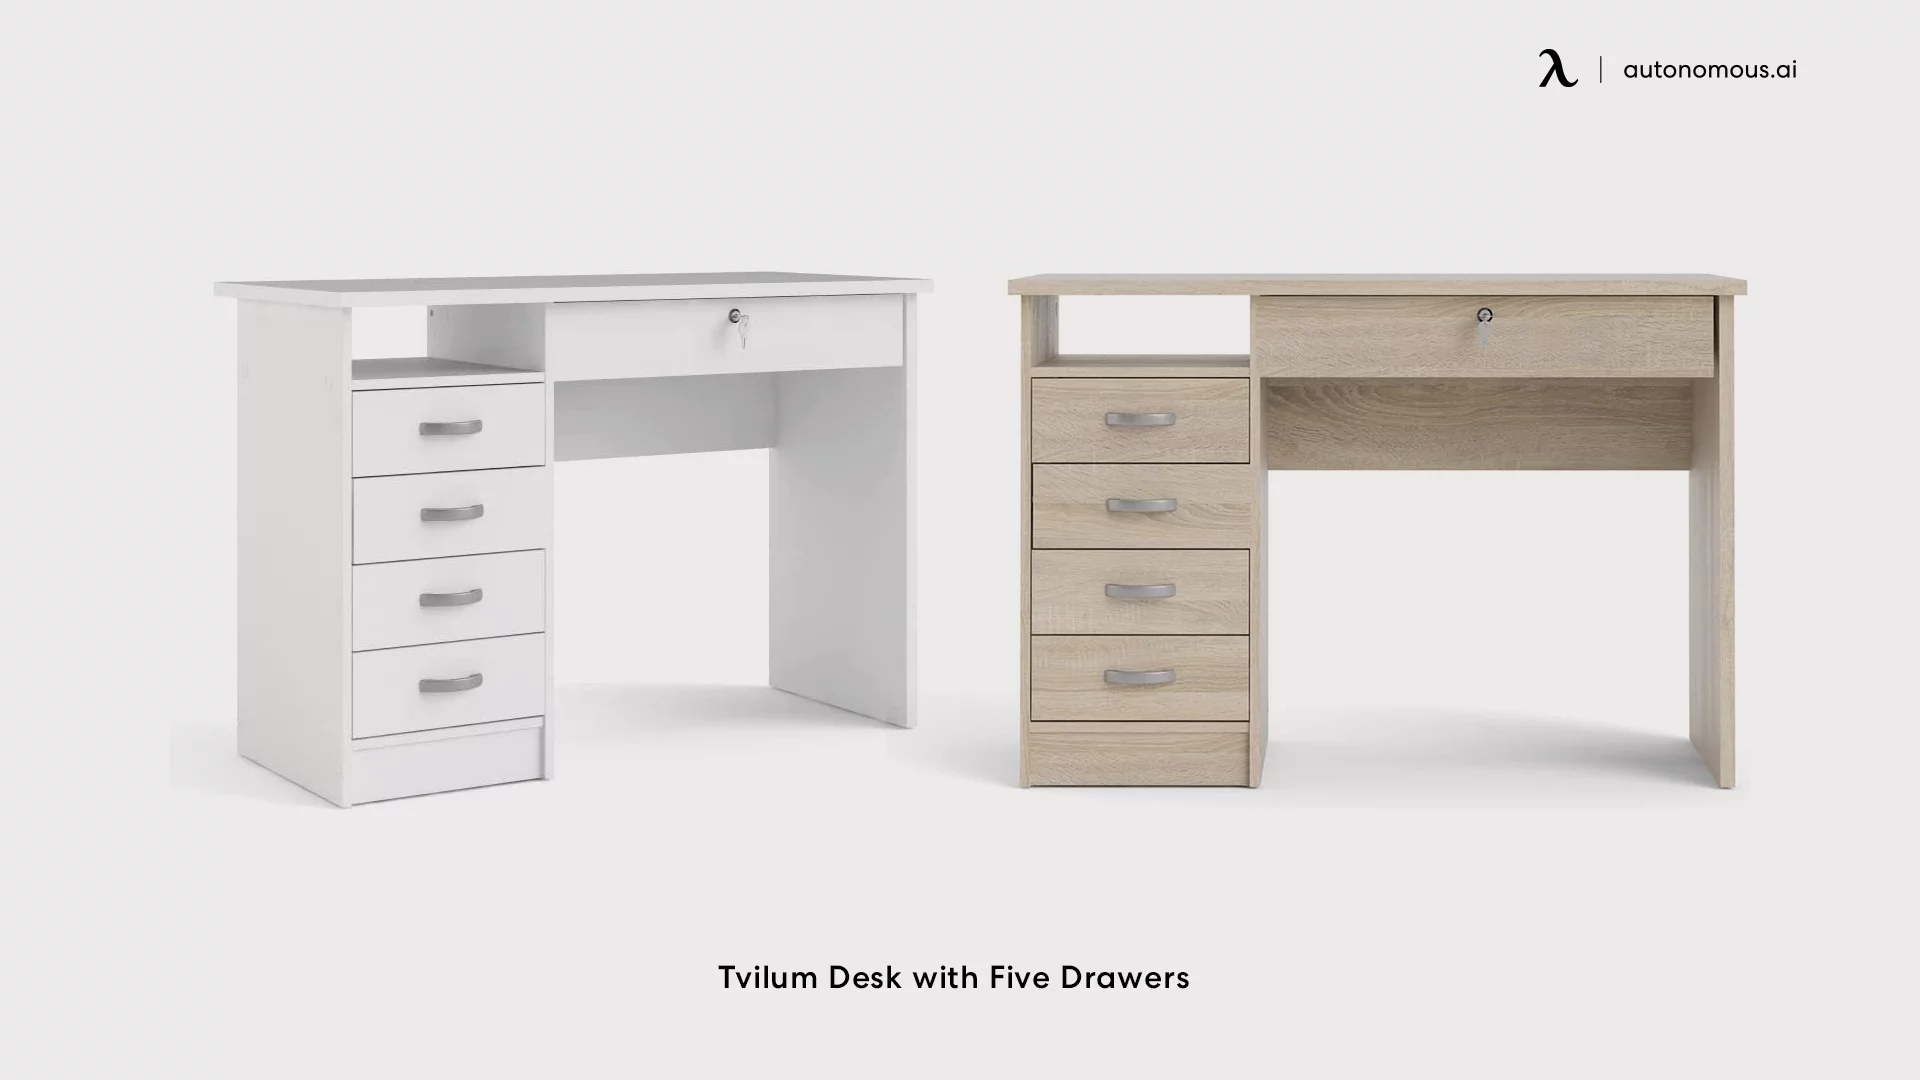 Tvilum Desk with Five Drawers